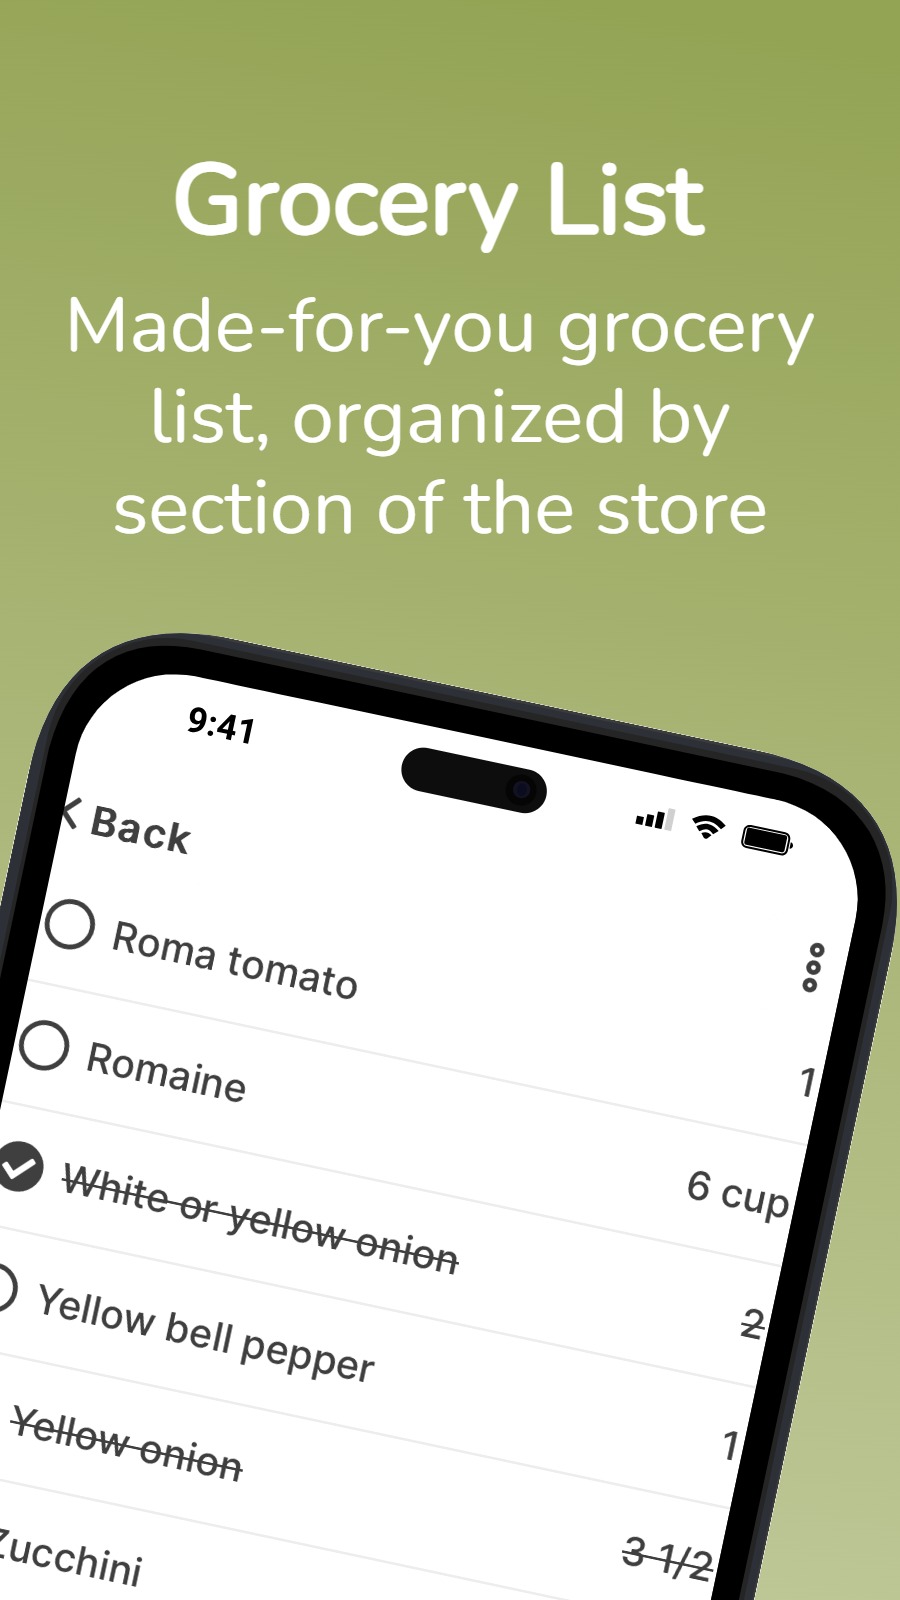 Grocery List - Made-for-you grocery list, organized by section of the store